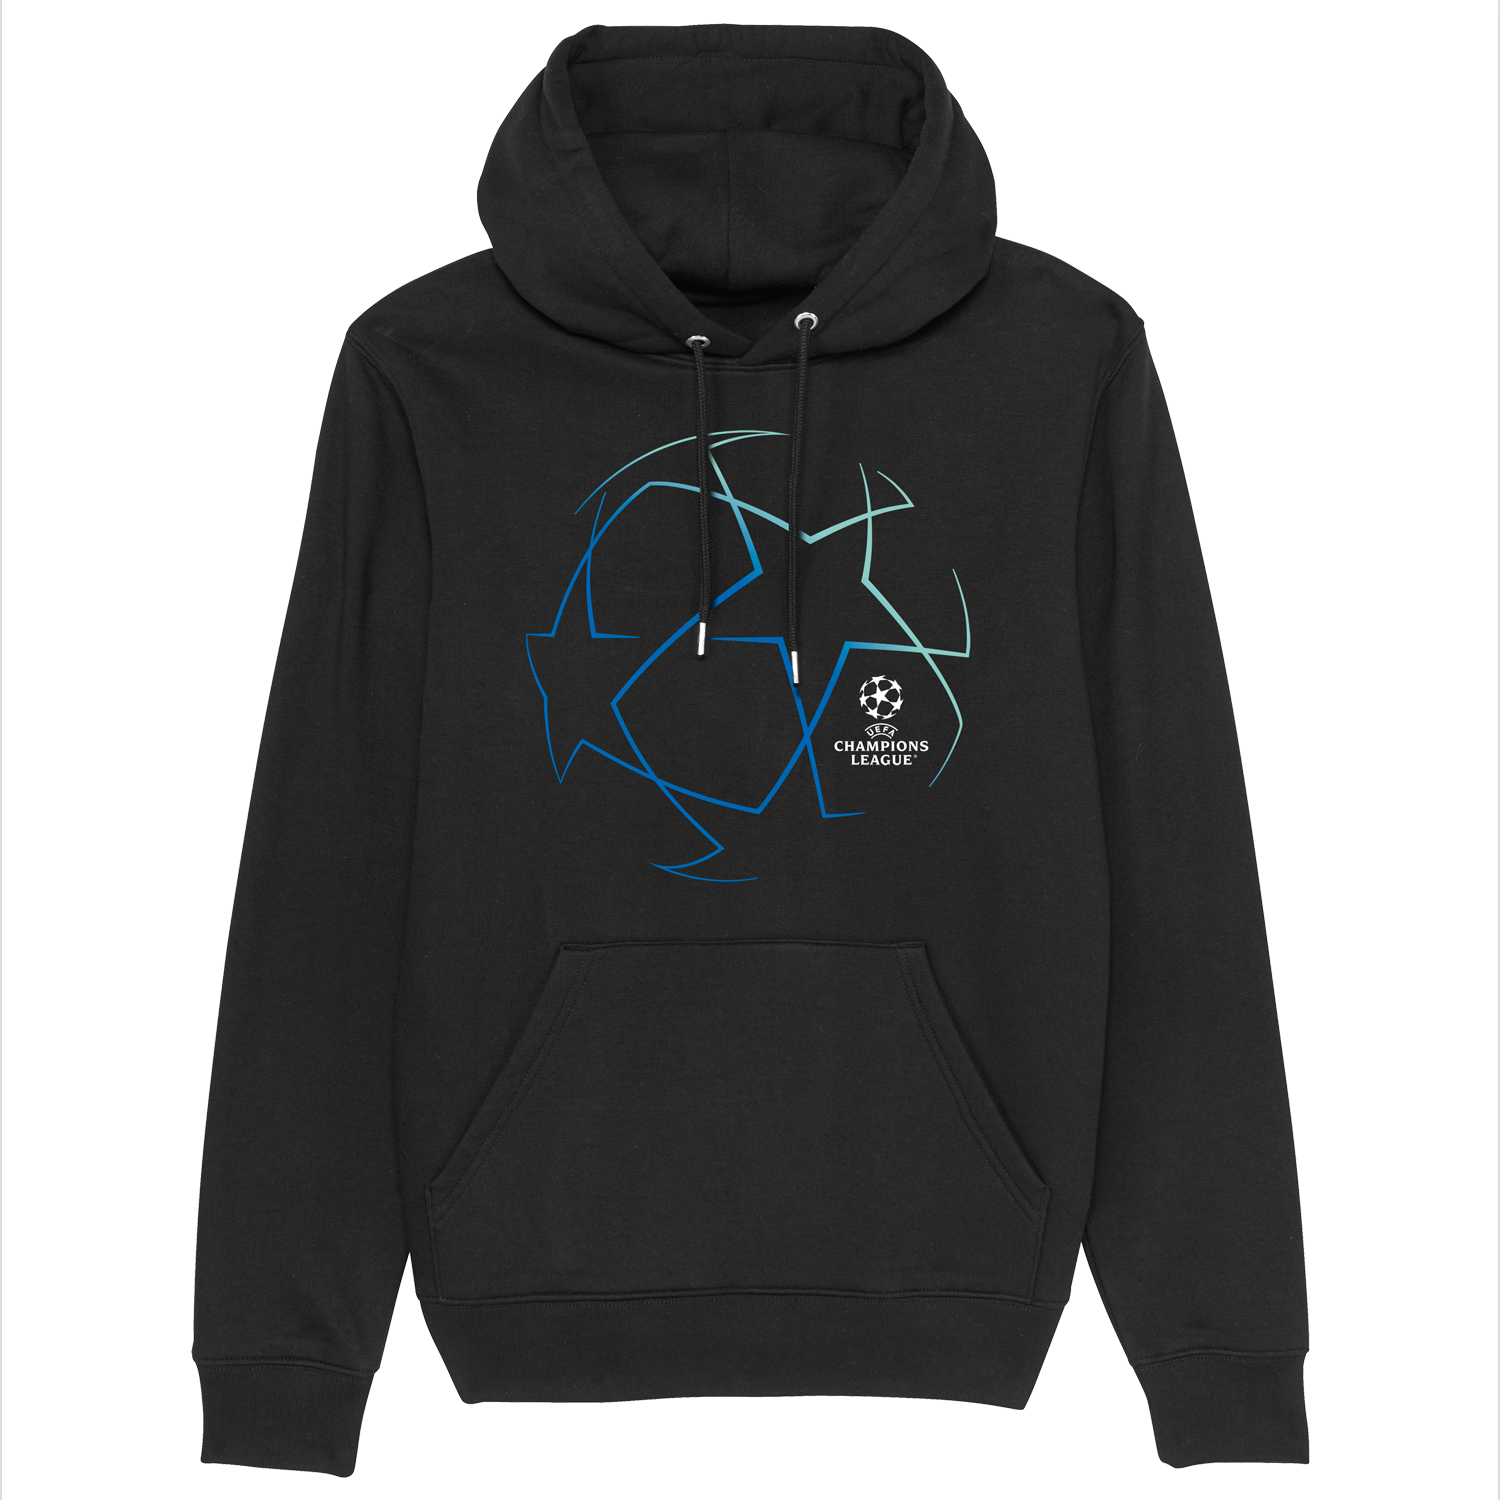 UEFA Champions League - Starball Black Hoodie UEFA Club Competitions Online Store